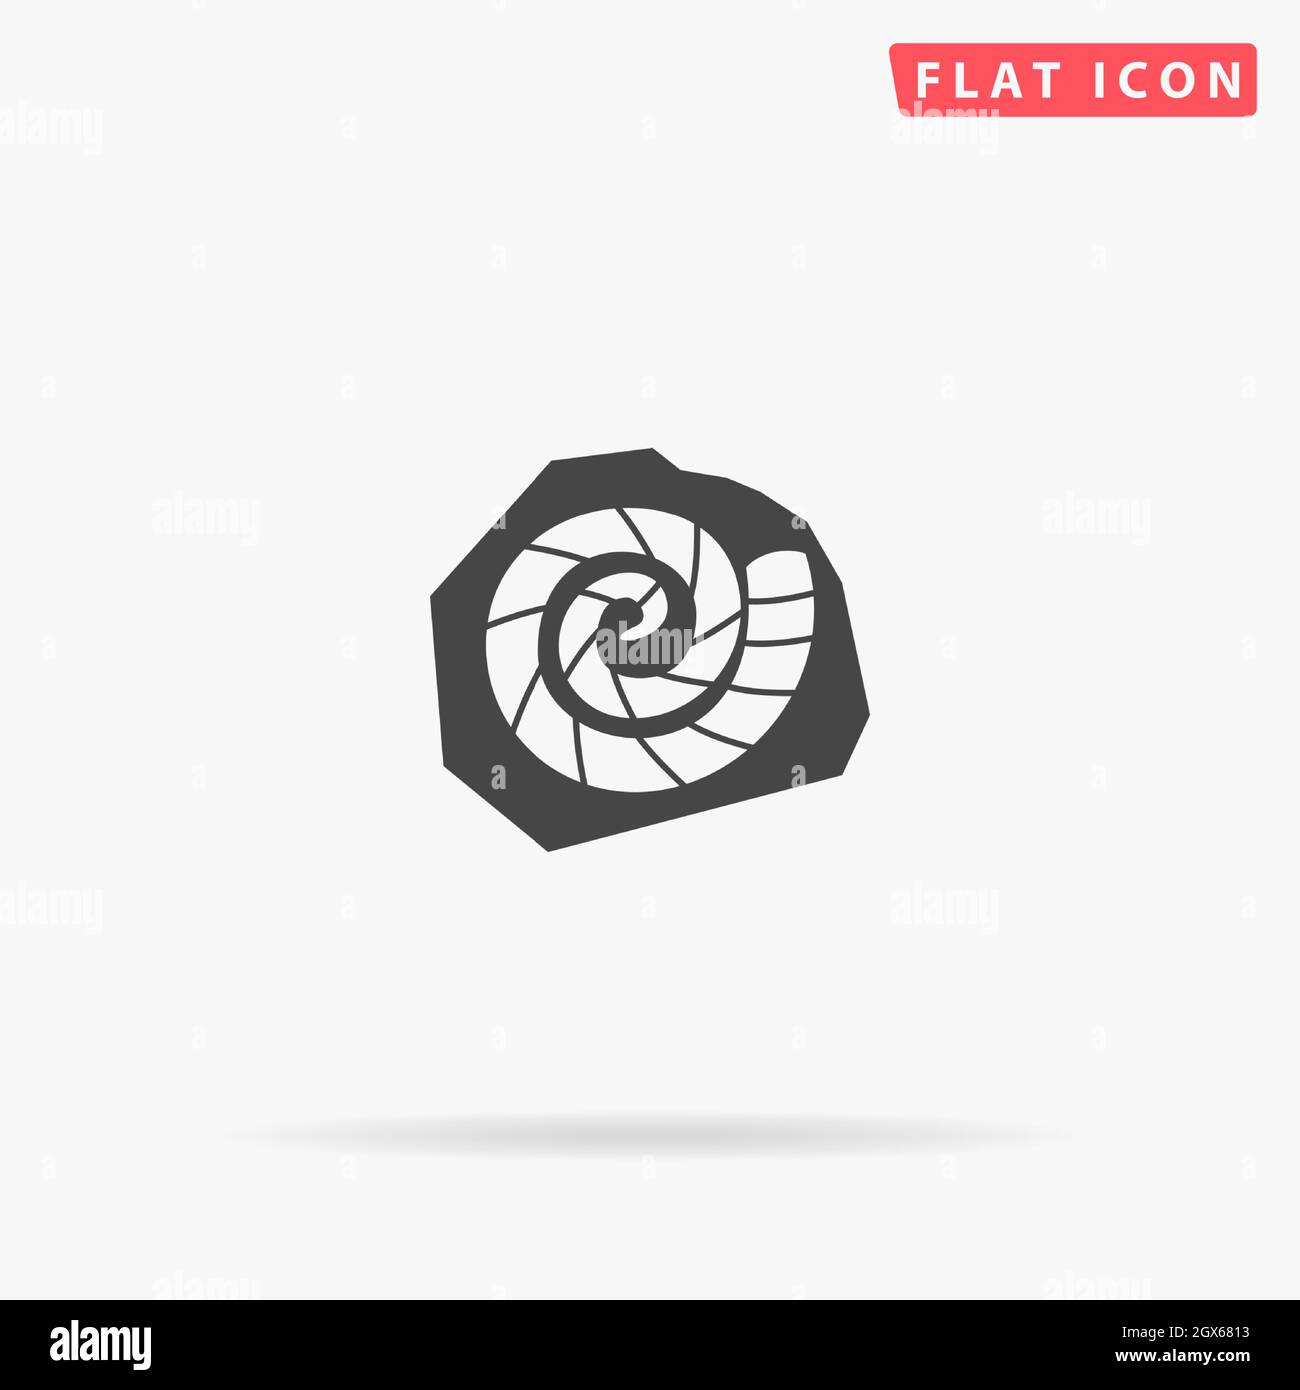 Fossilized Shell of Ammonite flat vector icon. Hand drawn style design illustrations. Stock Vector